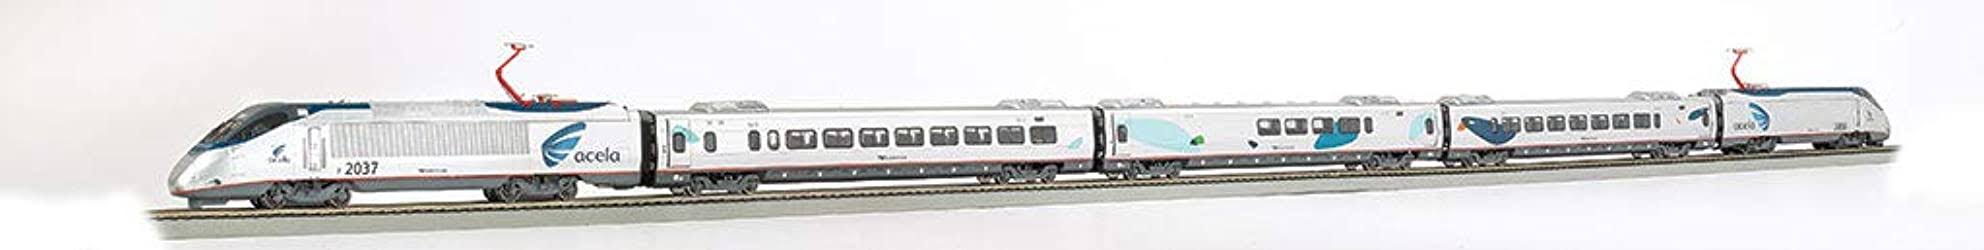 Bachmann Trains - Amtrak Acela DCC Equipped Ready to Run Electric Train Set - HO Scale